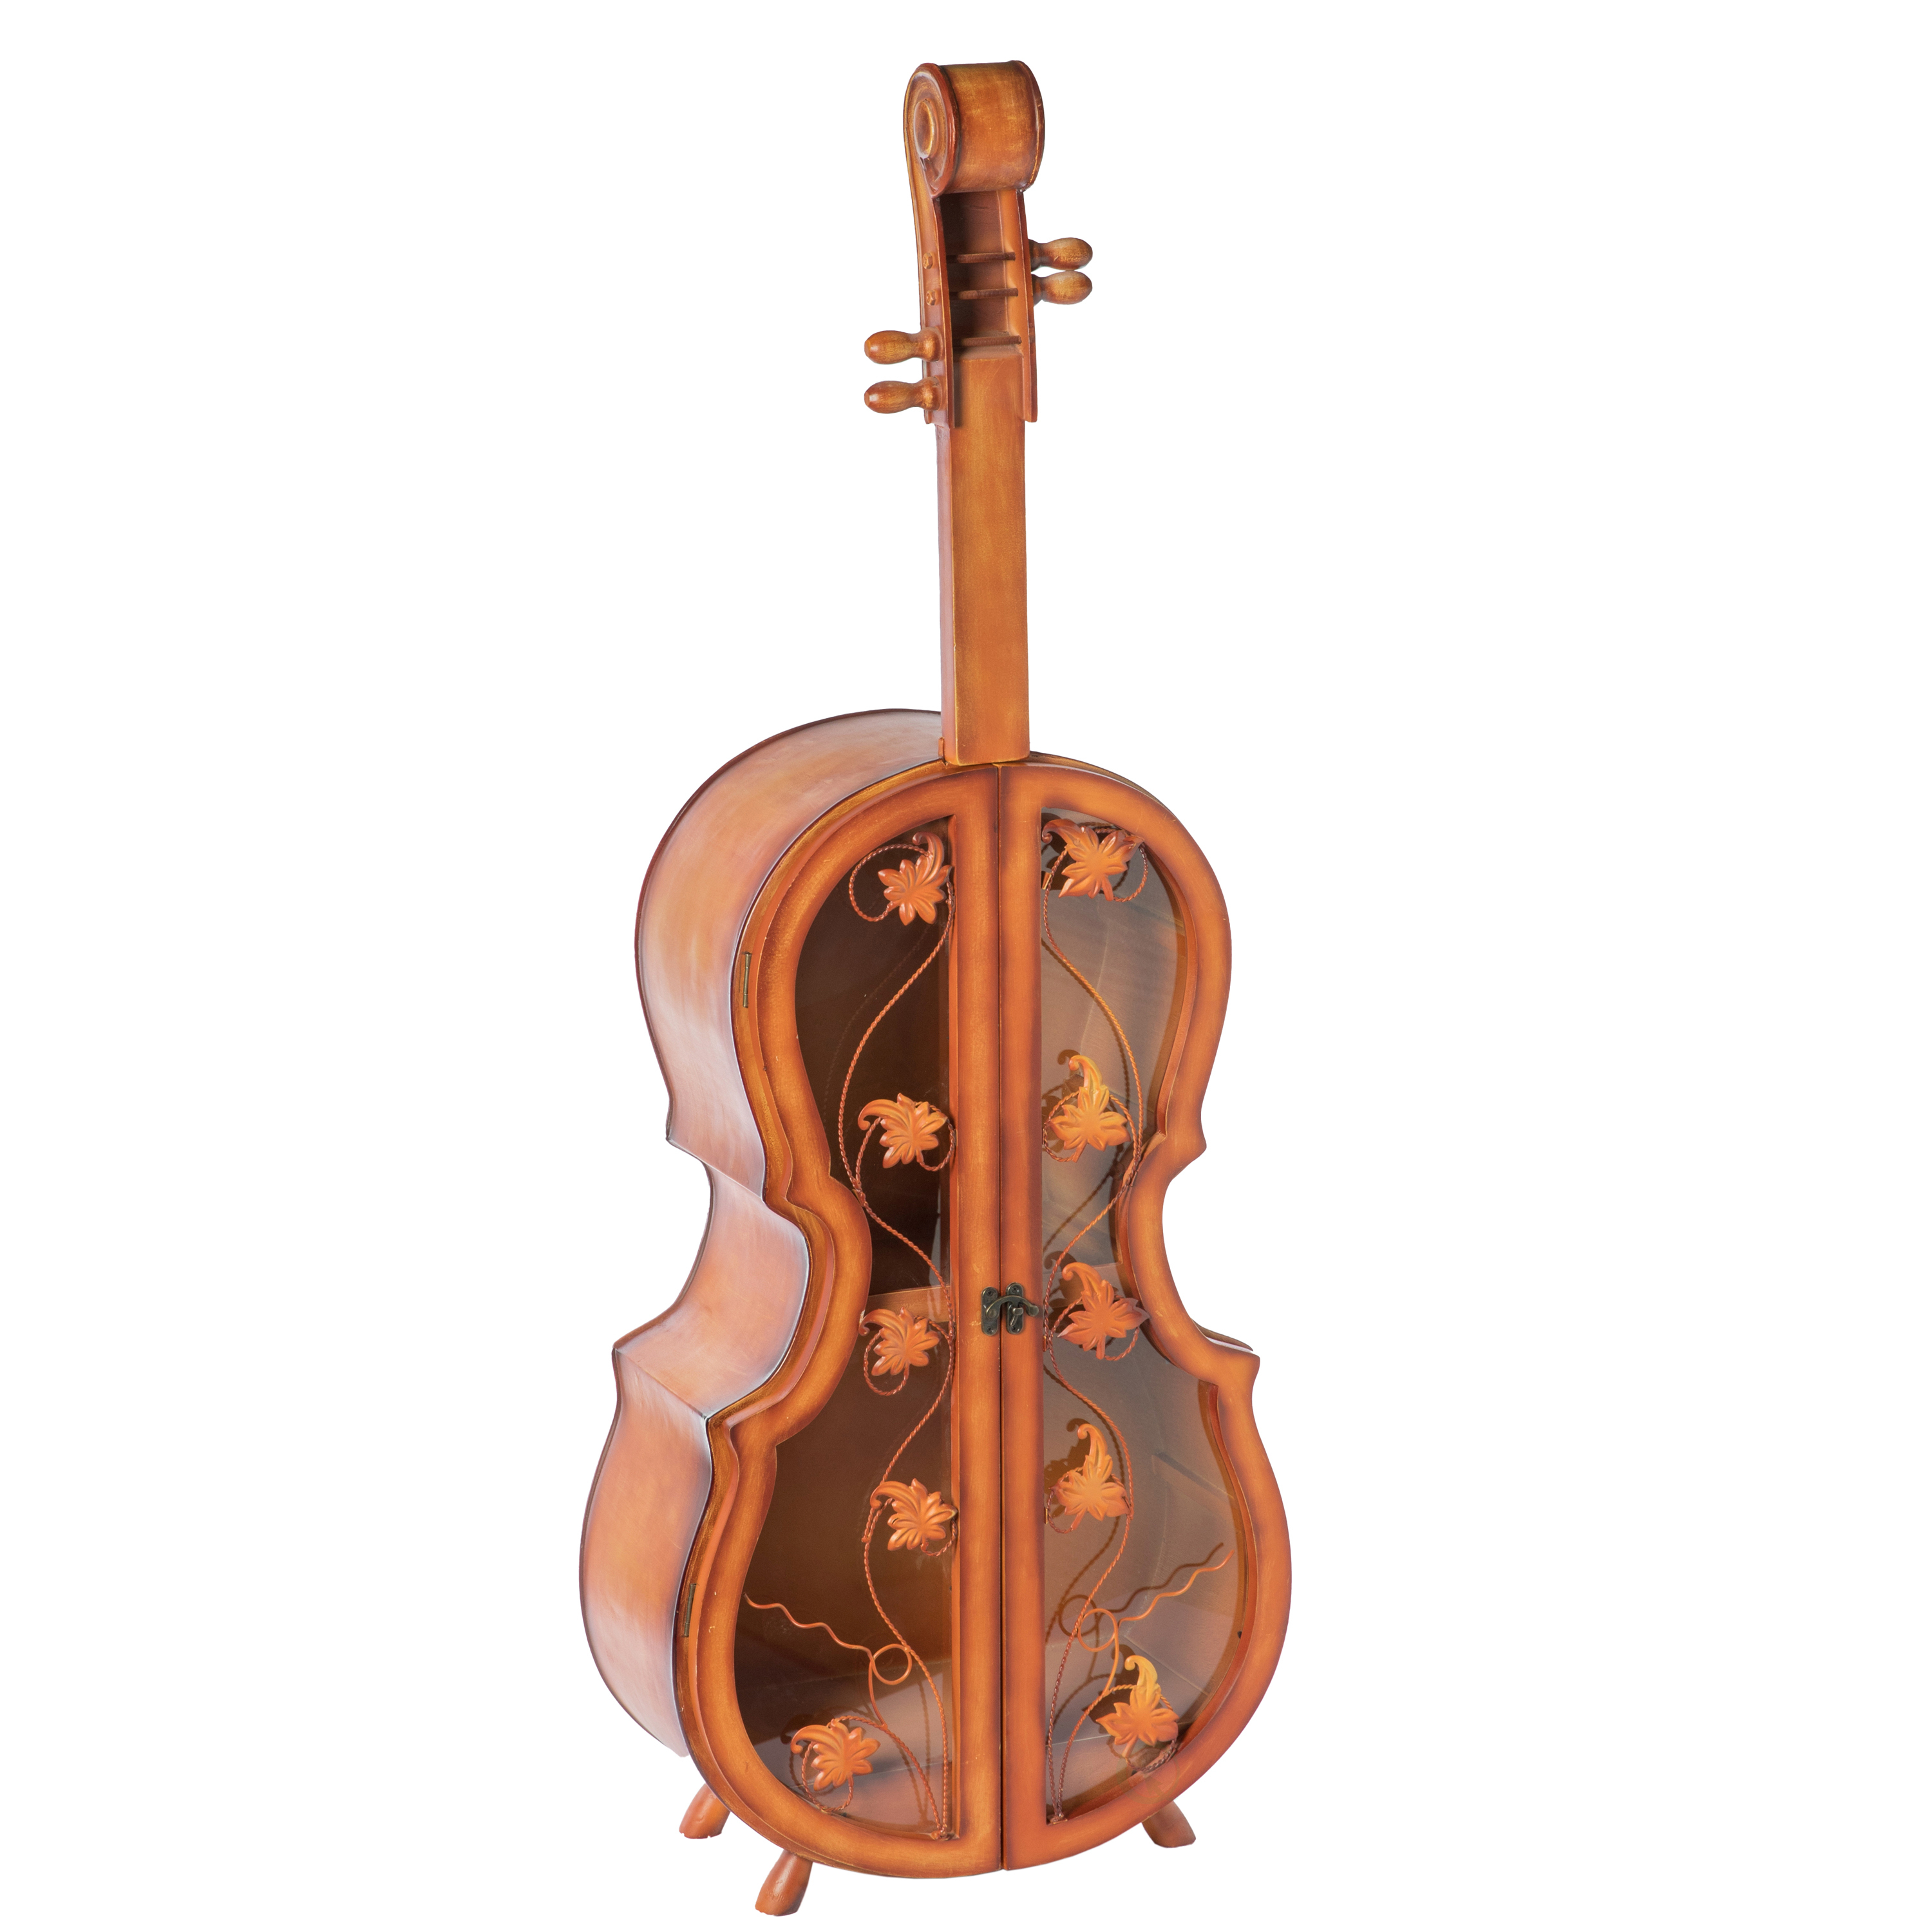 4.5 Feet Tall Violin Shaped Cabinet With 2 Shelf And Acrylic Clear Double Door